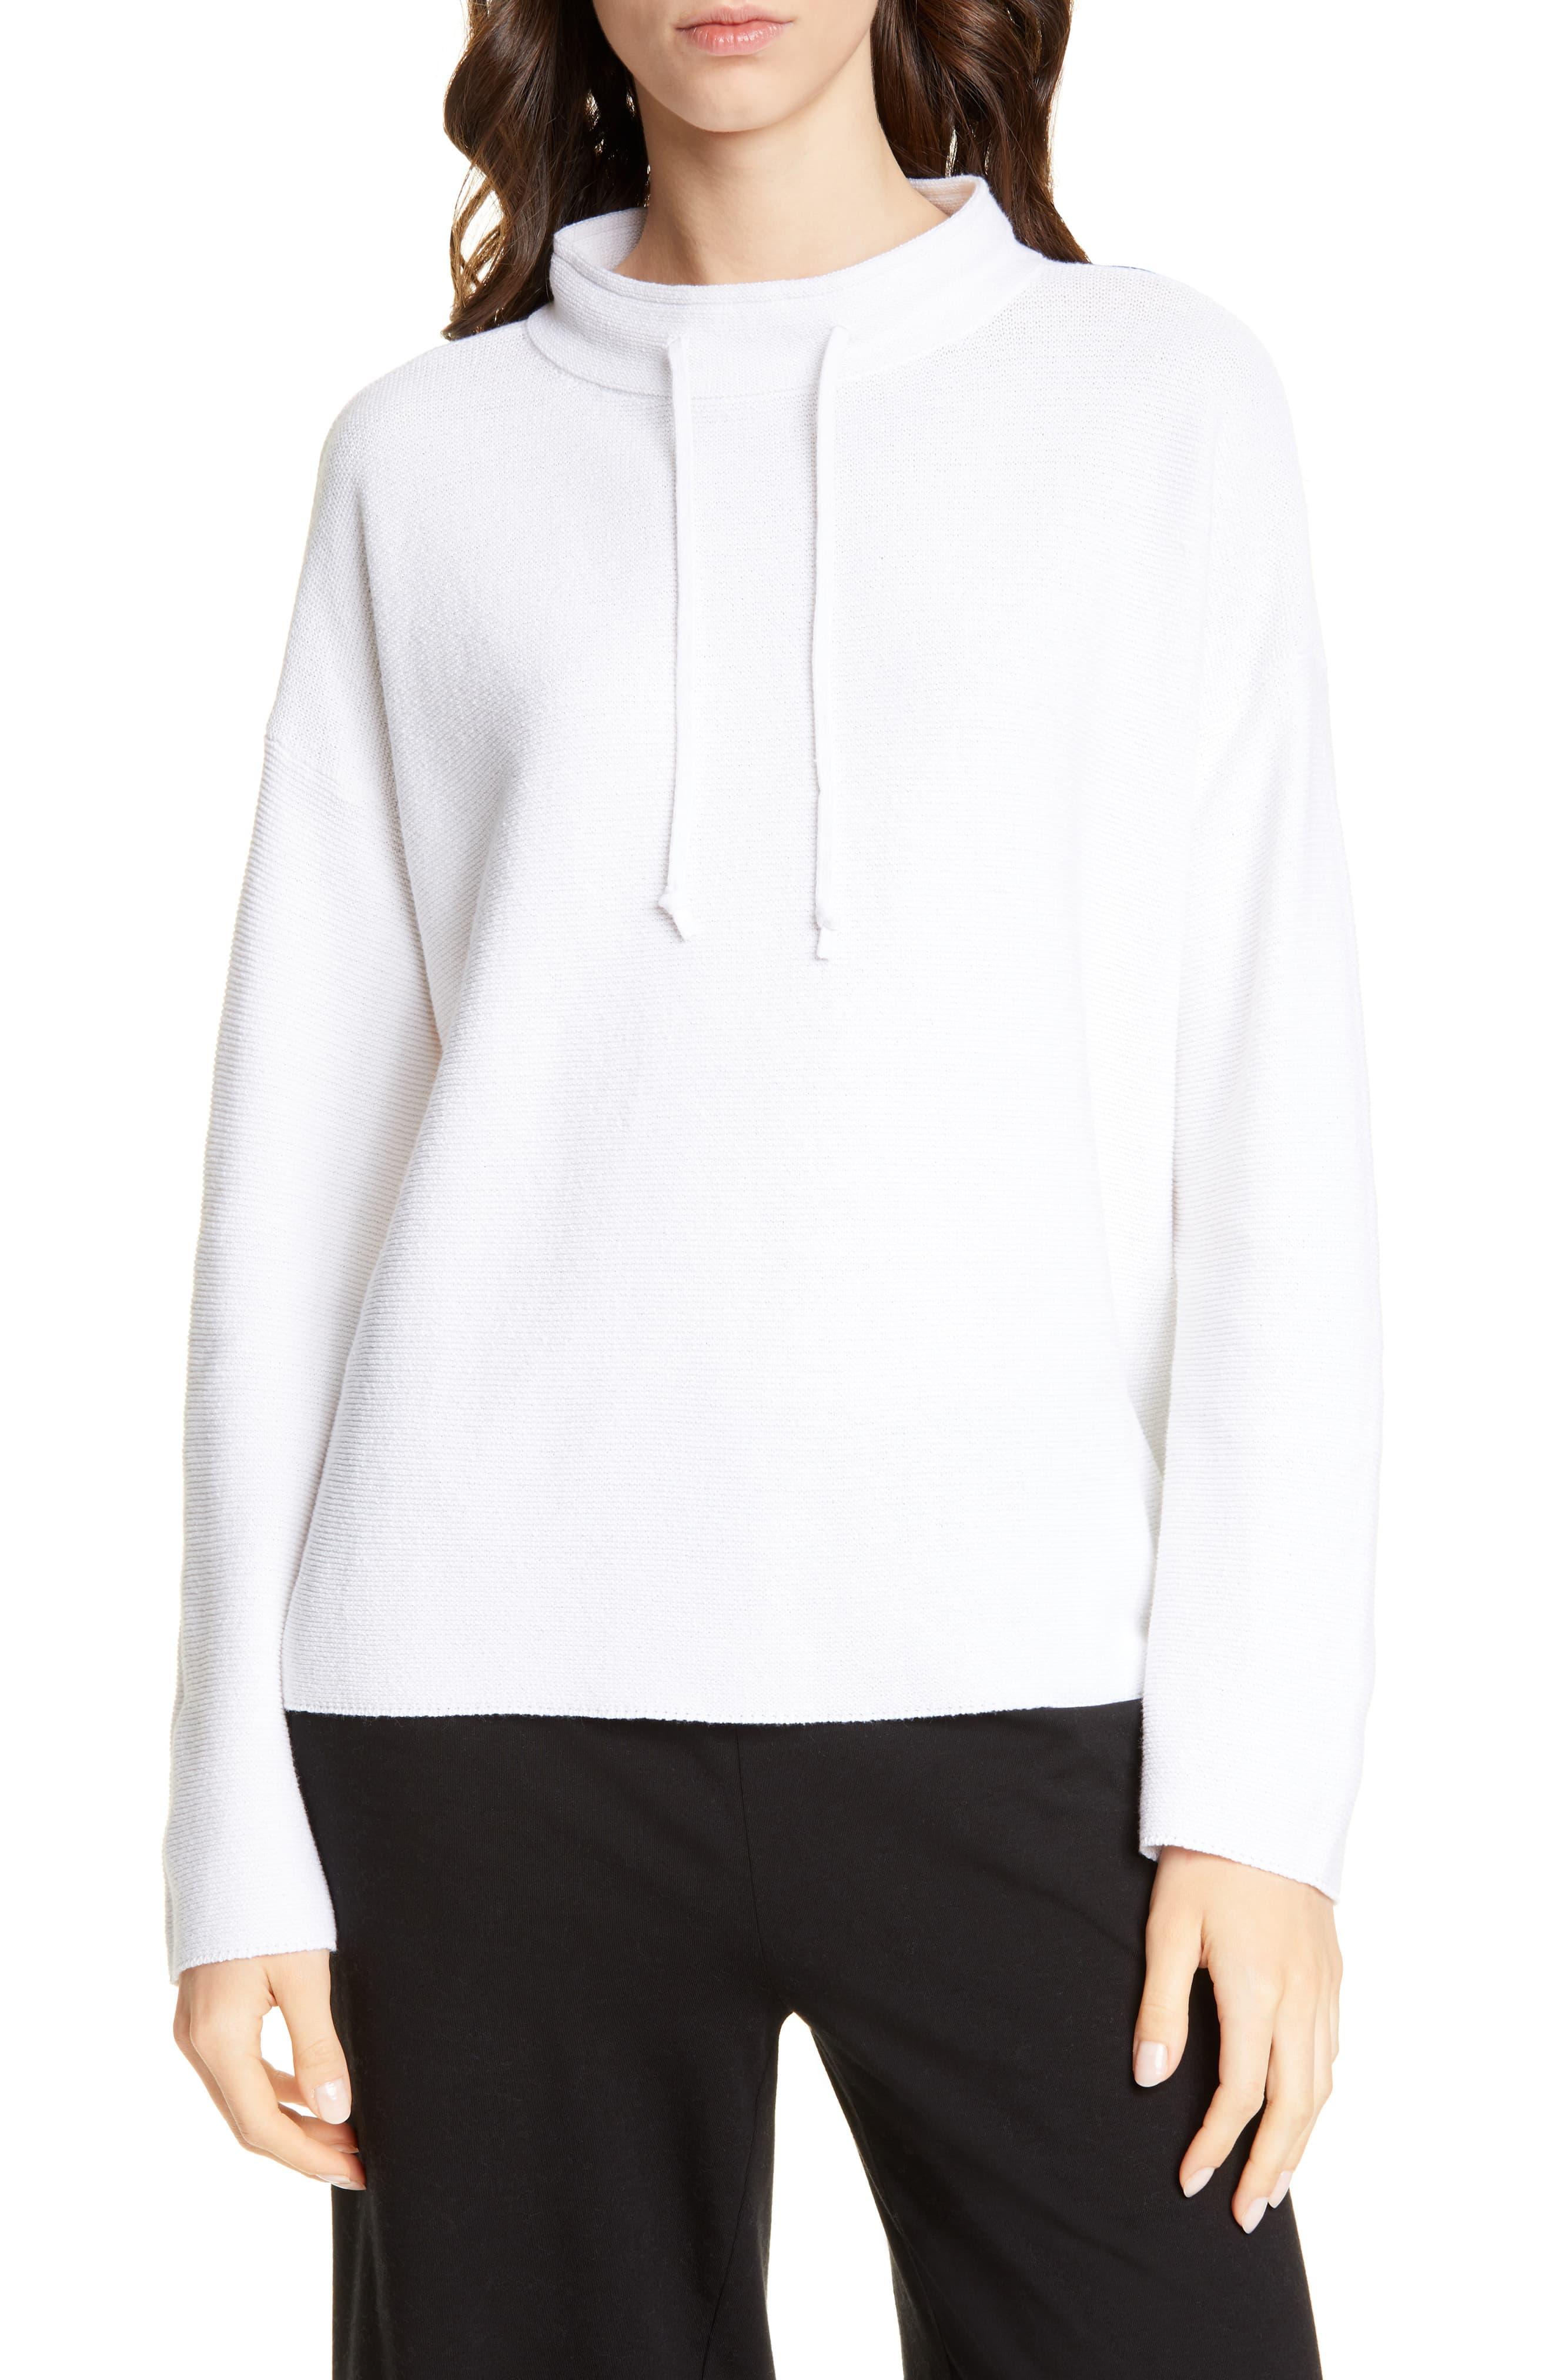 Eileen Fisher Funnel Neck Rib Sweater in White - Lyst